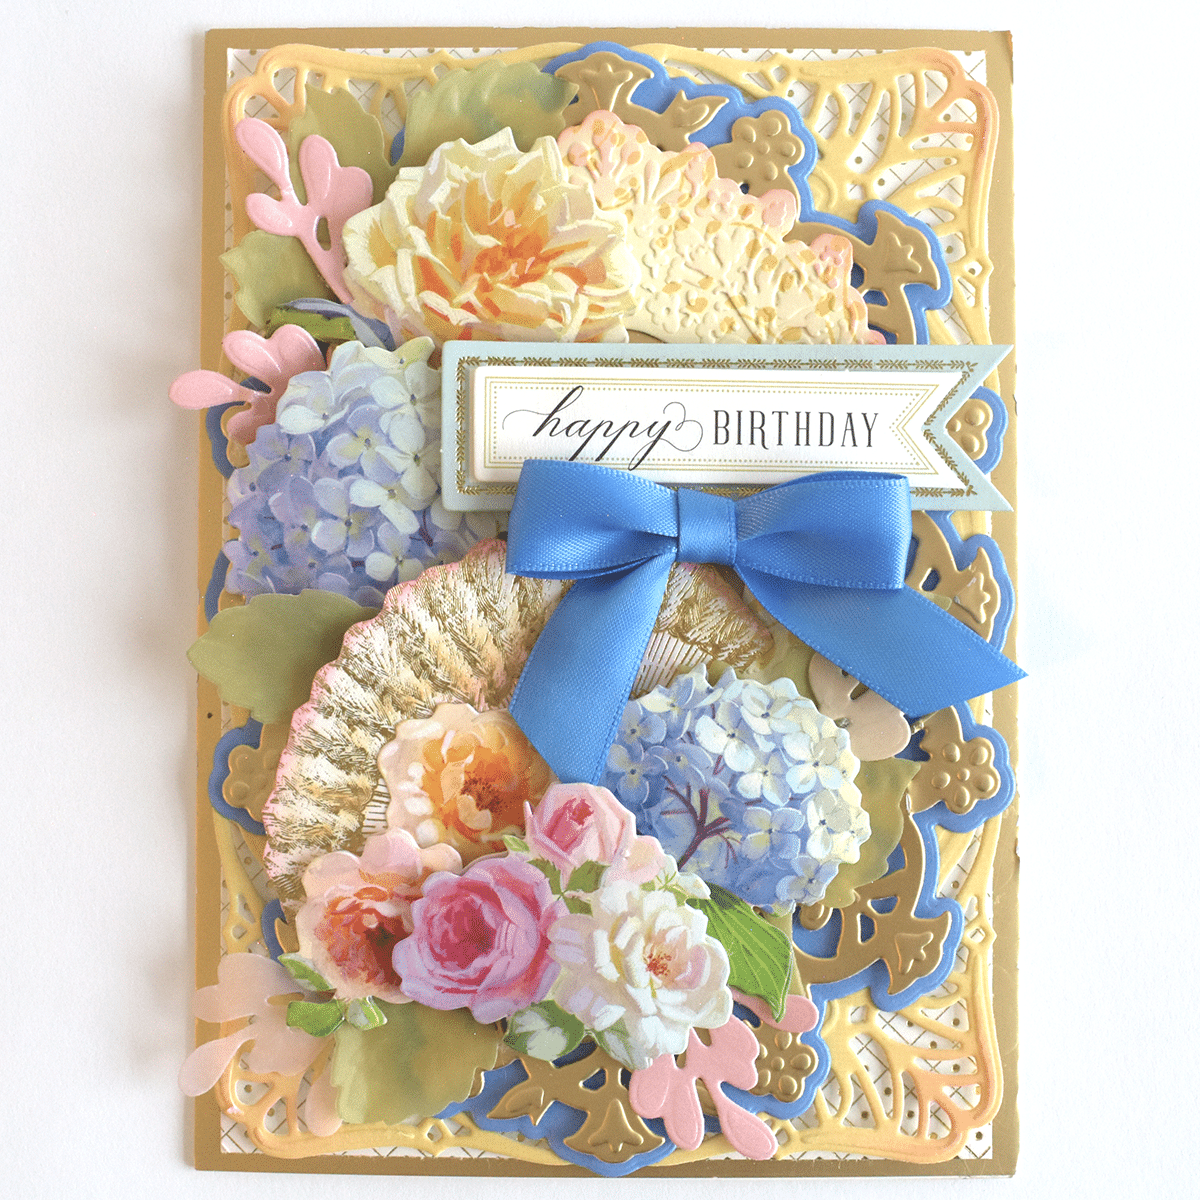 a happy birthday card with flowers and a blue ribbon.